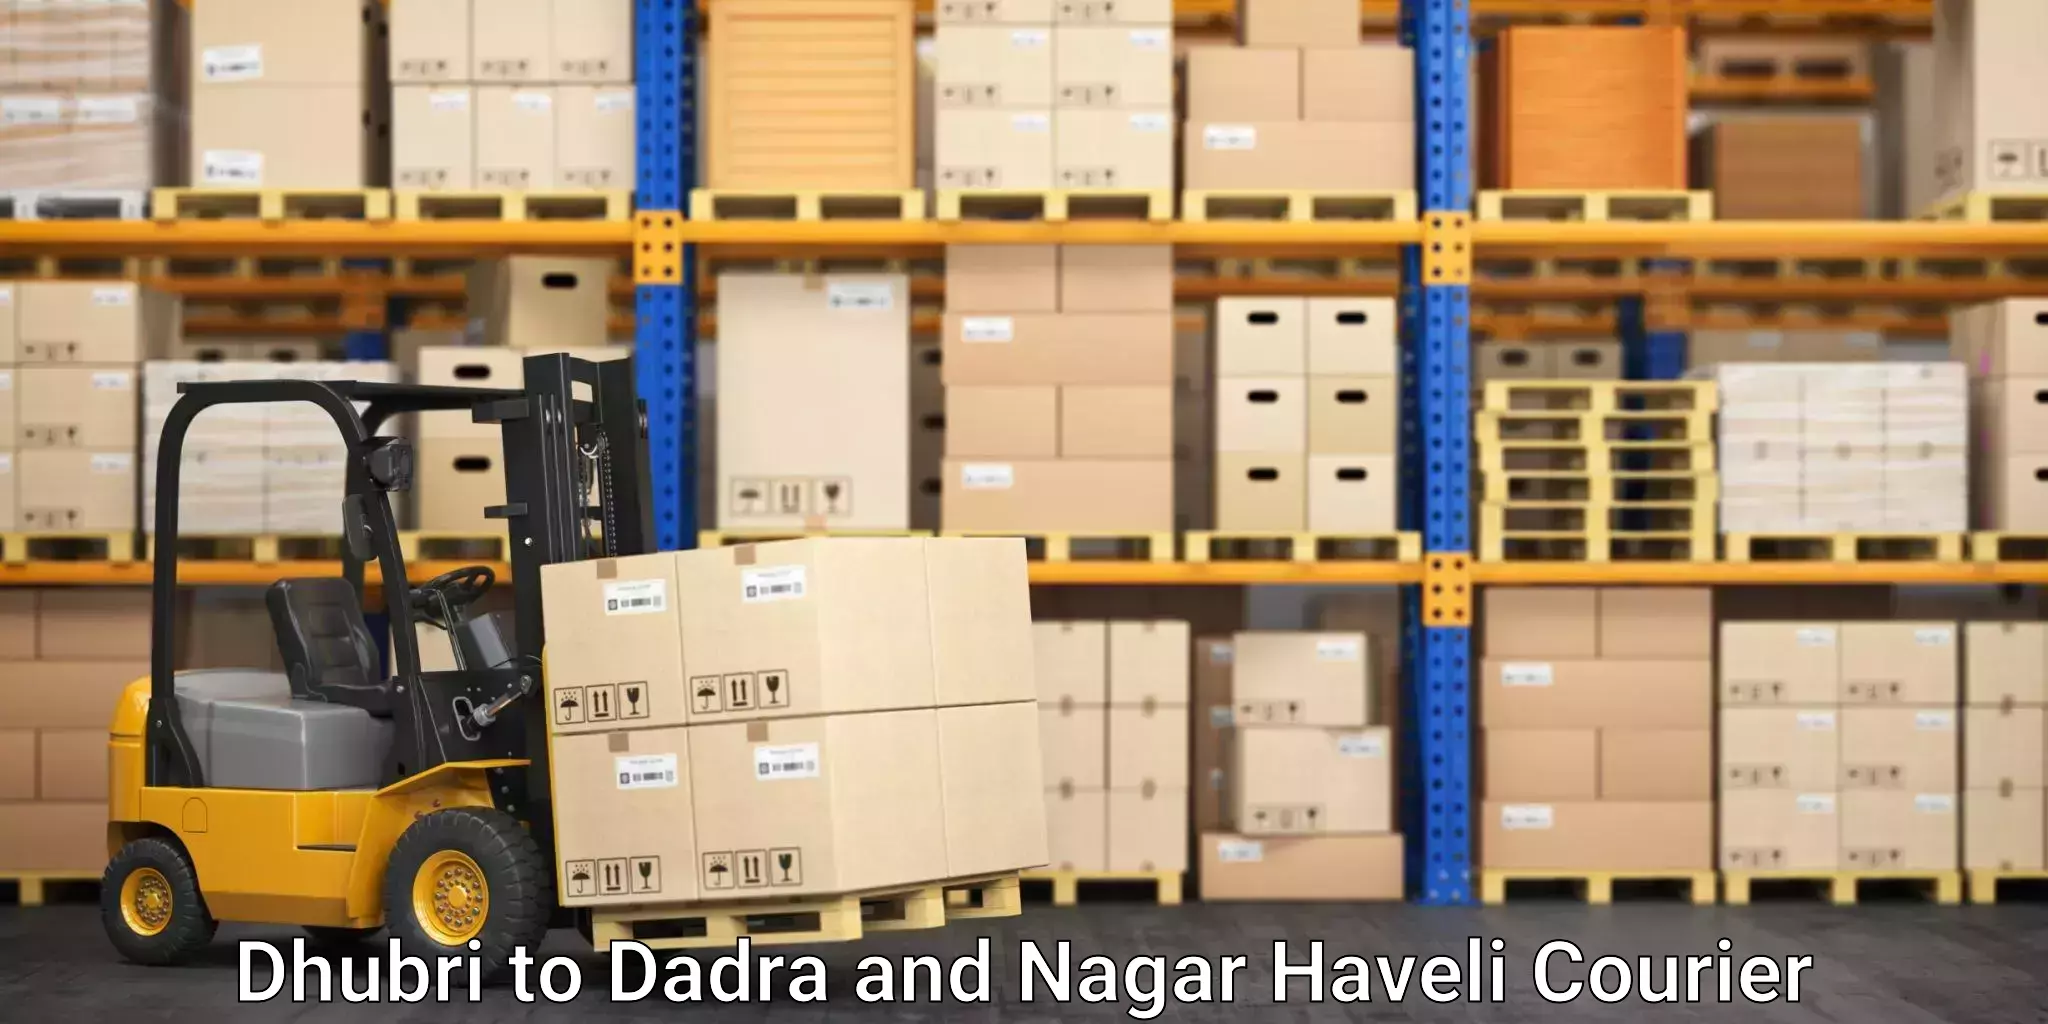 State-of-the-art courier technology Dhubri to Dadra and Nagar Haveli